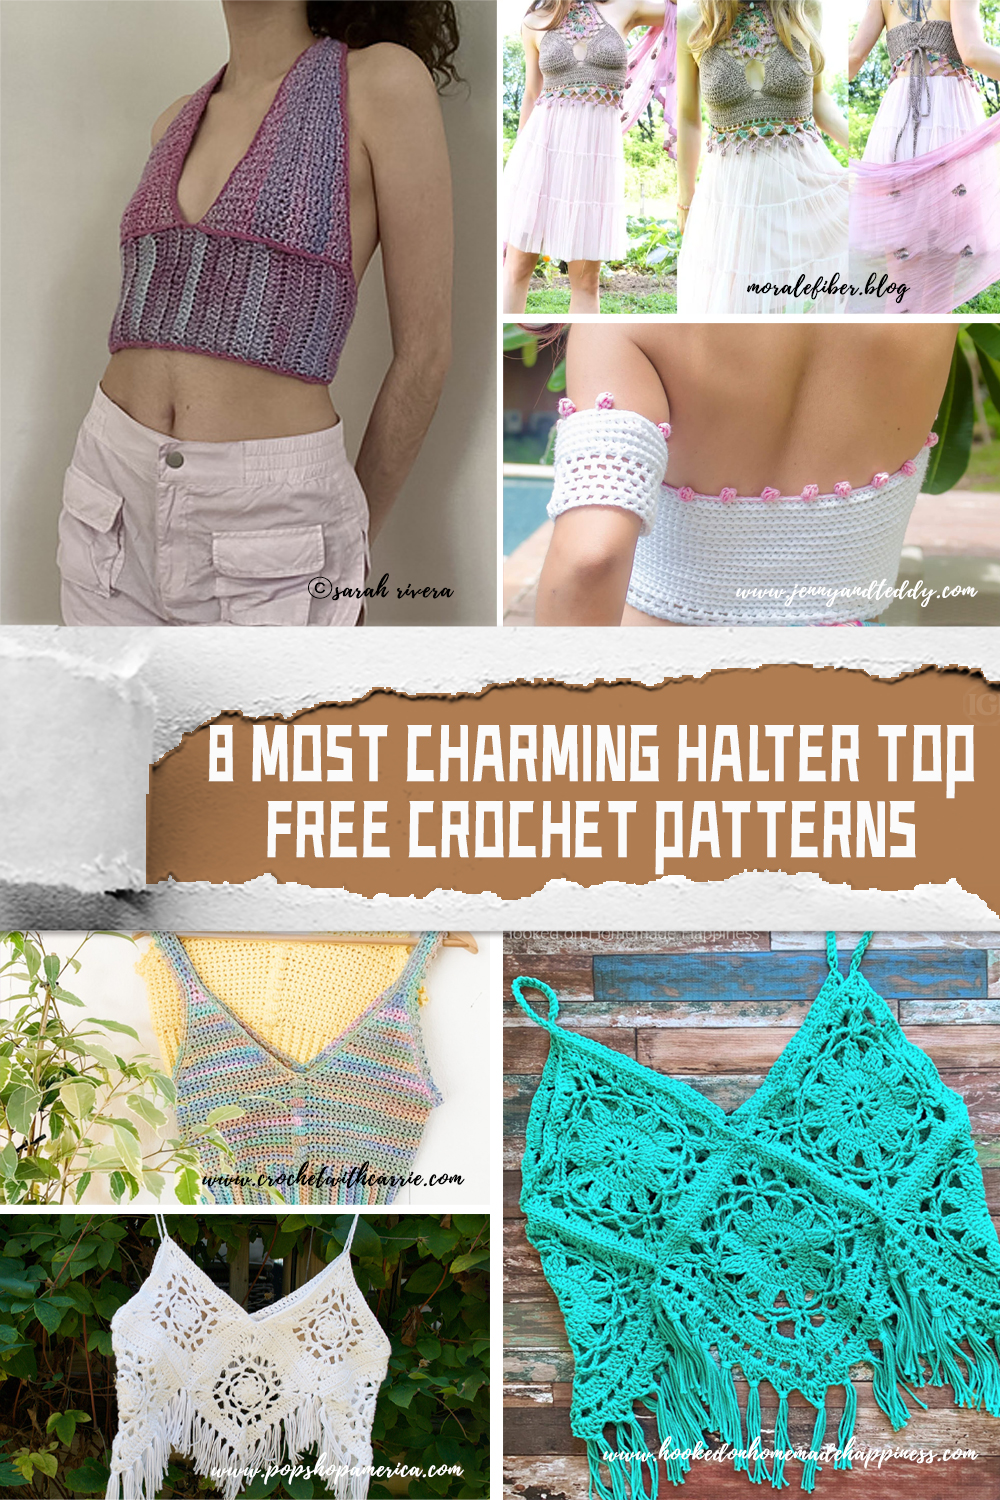 8 Most Charming Halter Top FREE Crochet Patterns 